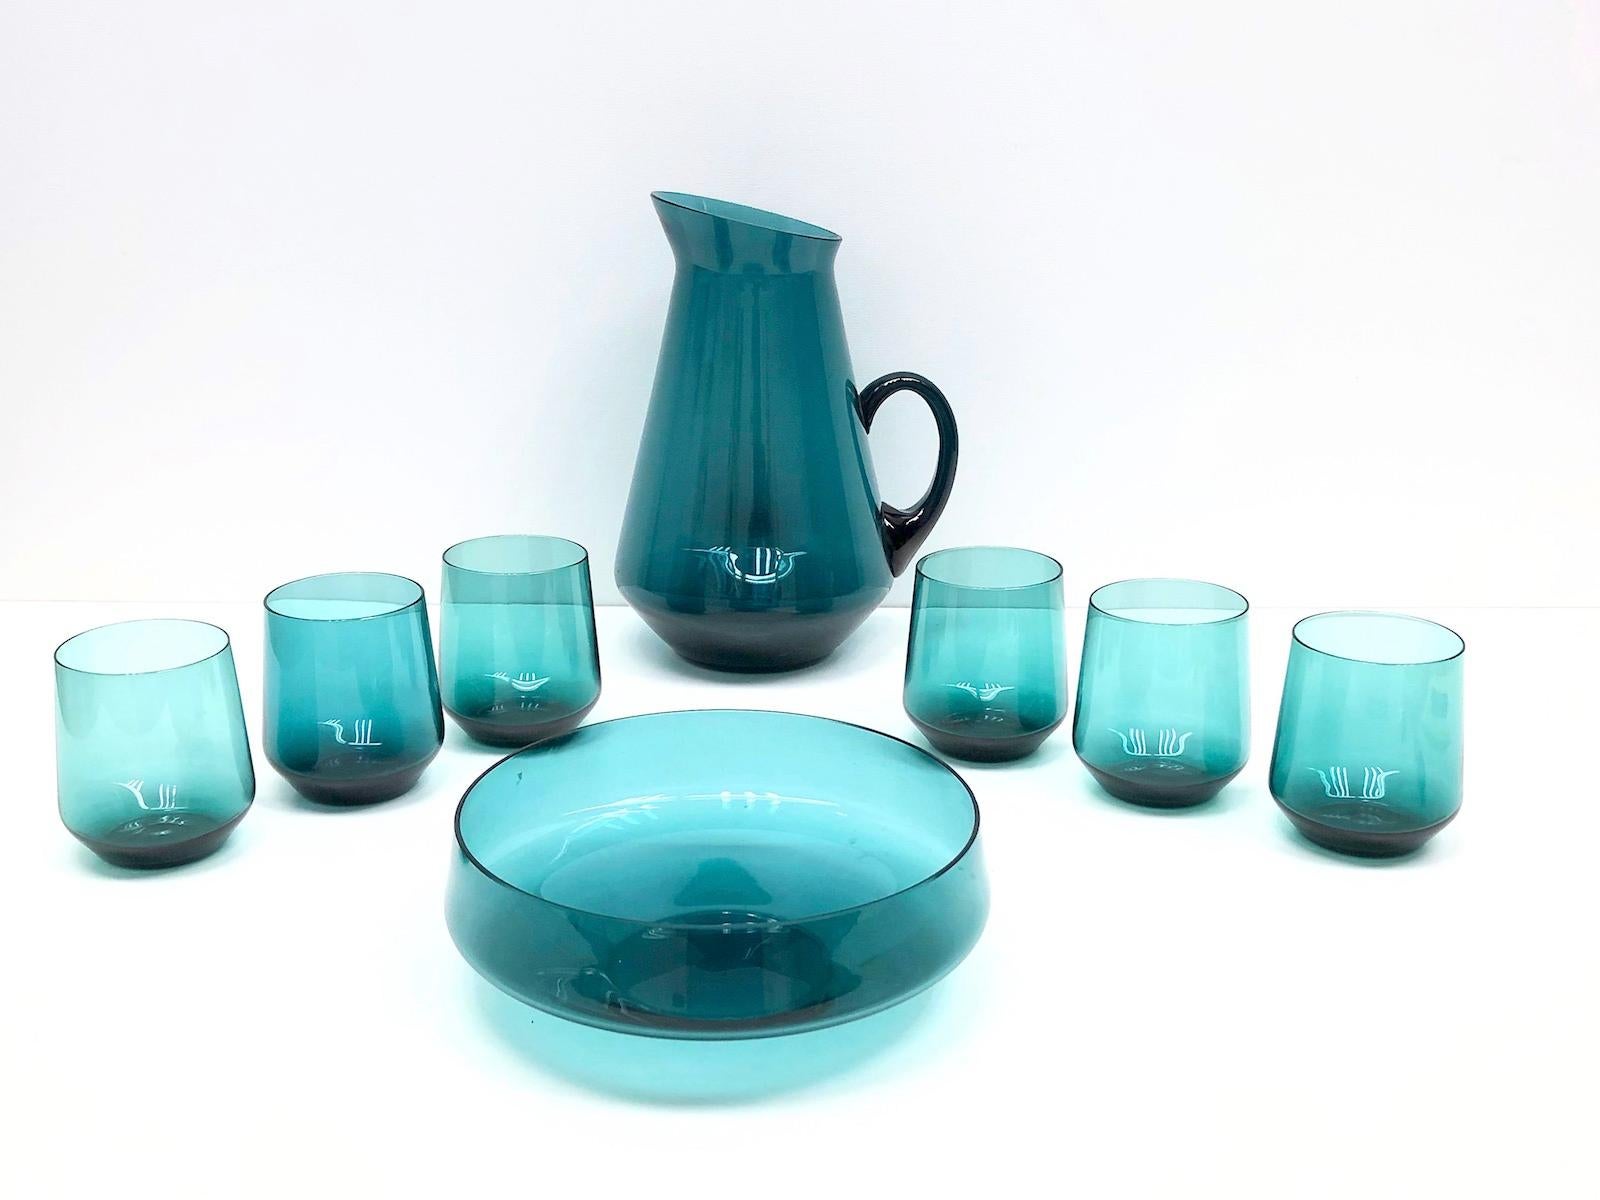 Beautiful Bauhaus design juice jug, drinking glasses and fruit bowl set. Designed in the minimalist style of Wilhelm Wagenfeld. Made in the midcentury era (1950s) in Germany. A very beautiful set in Turmalin color. Attributed to WMF Glass, Germany.